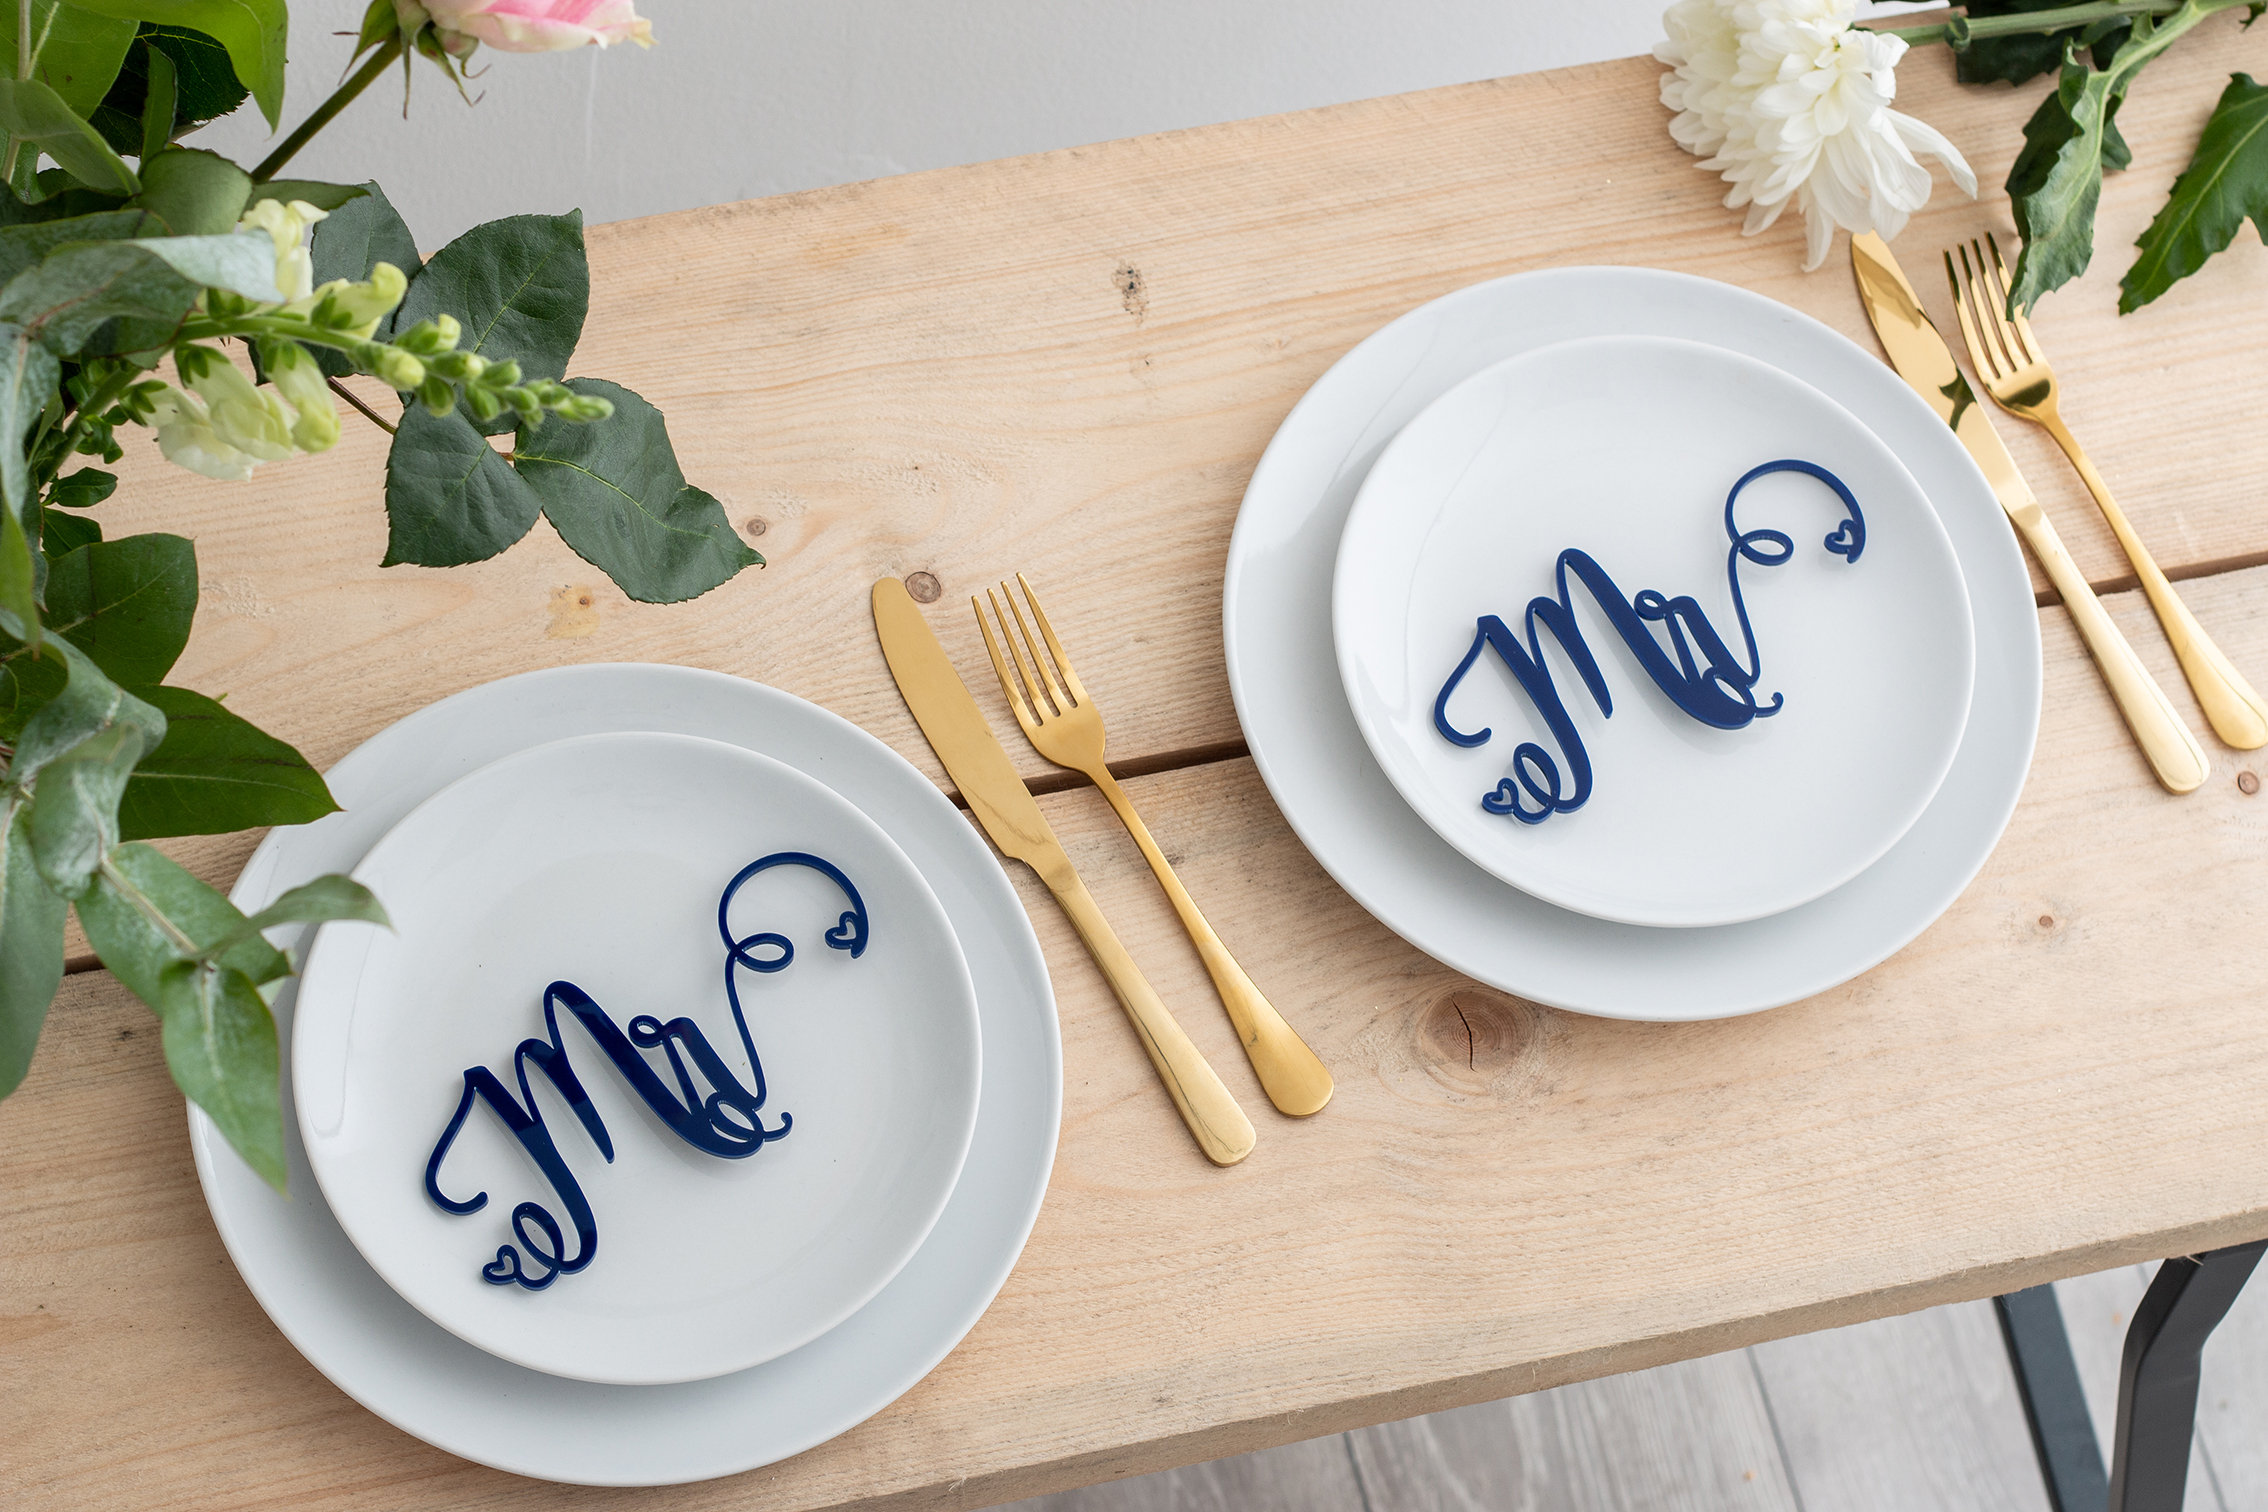 Mr & Place Settings - Groom Table Decorations Wedding Top Setting